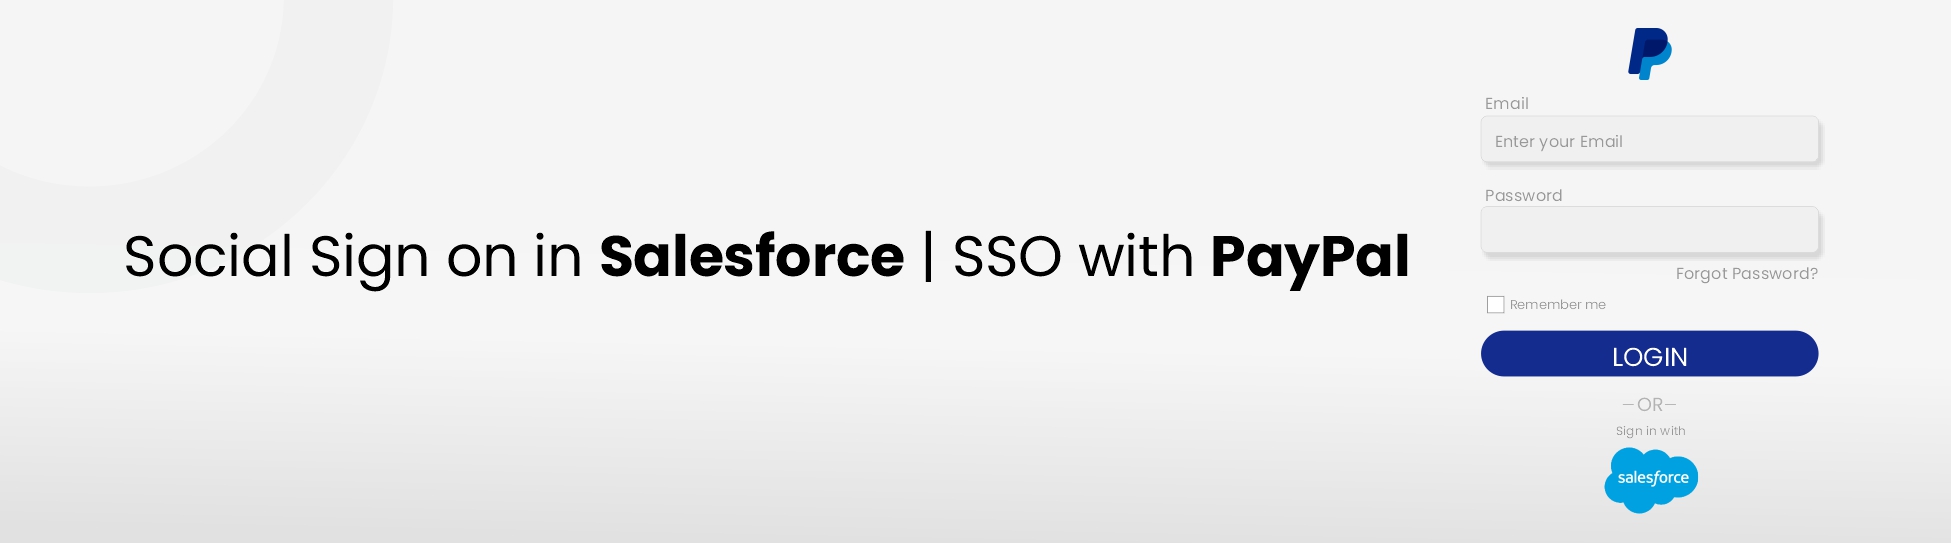 Social-Sign-on-in-Salesforce-SSO-with-PayPal